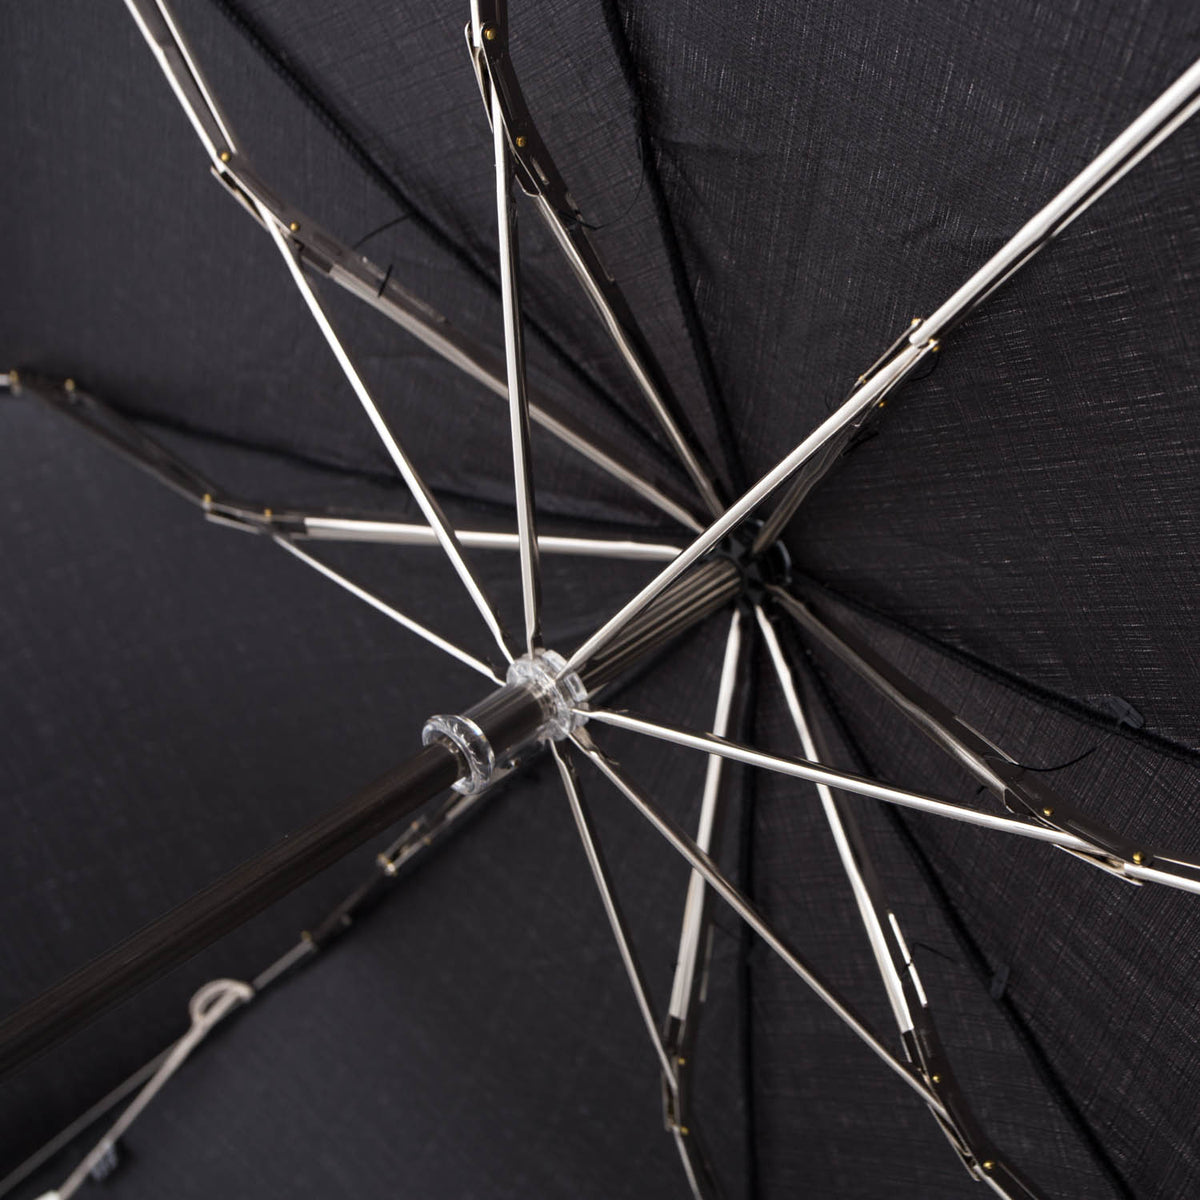 A close up of the Imperial Black Travel Umbrella with Woven Leather Handle from KirbyAllison.com.